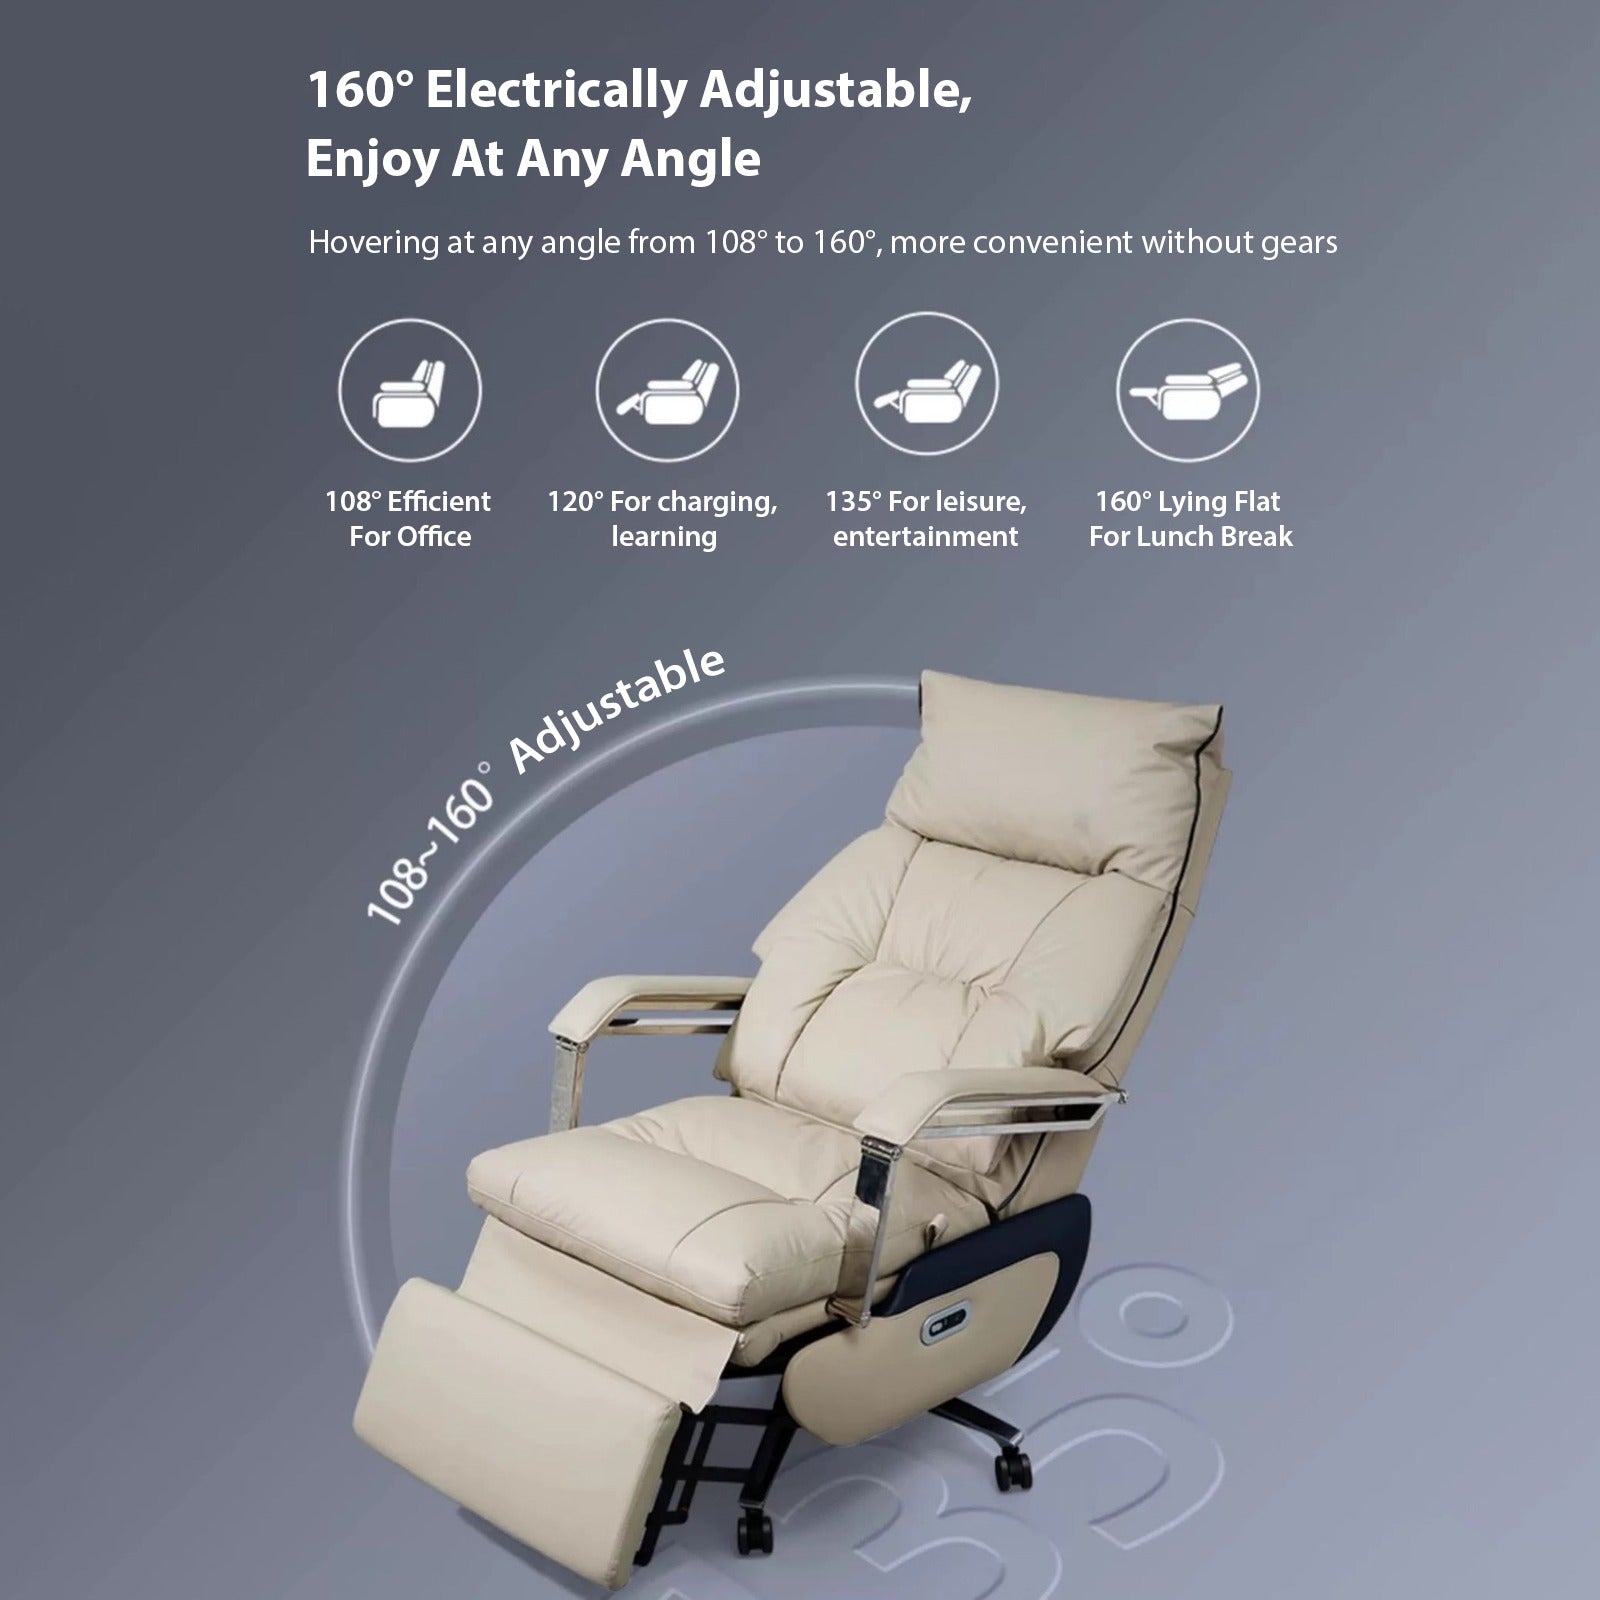 Showcasing Premium Electric Office Chair by mentioning the different adjustable positions of it 